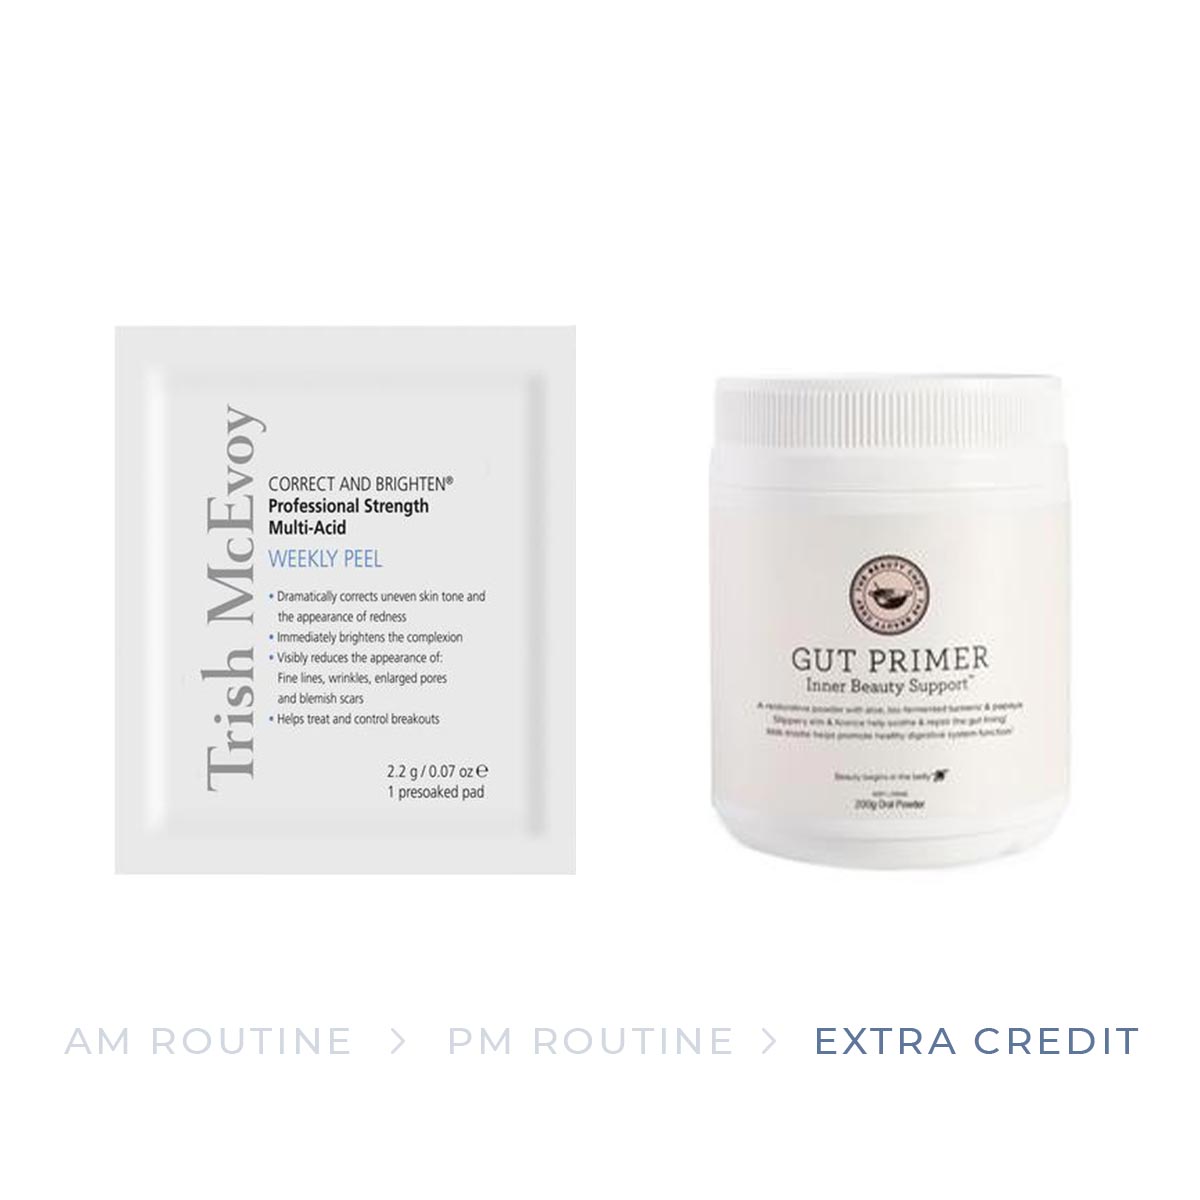 The products for the Extra Credit part of the normal skin skincare routine